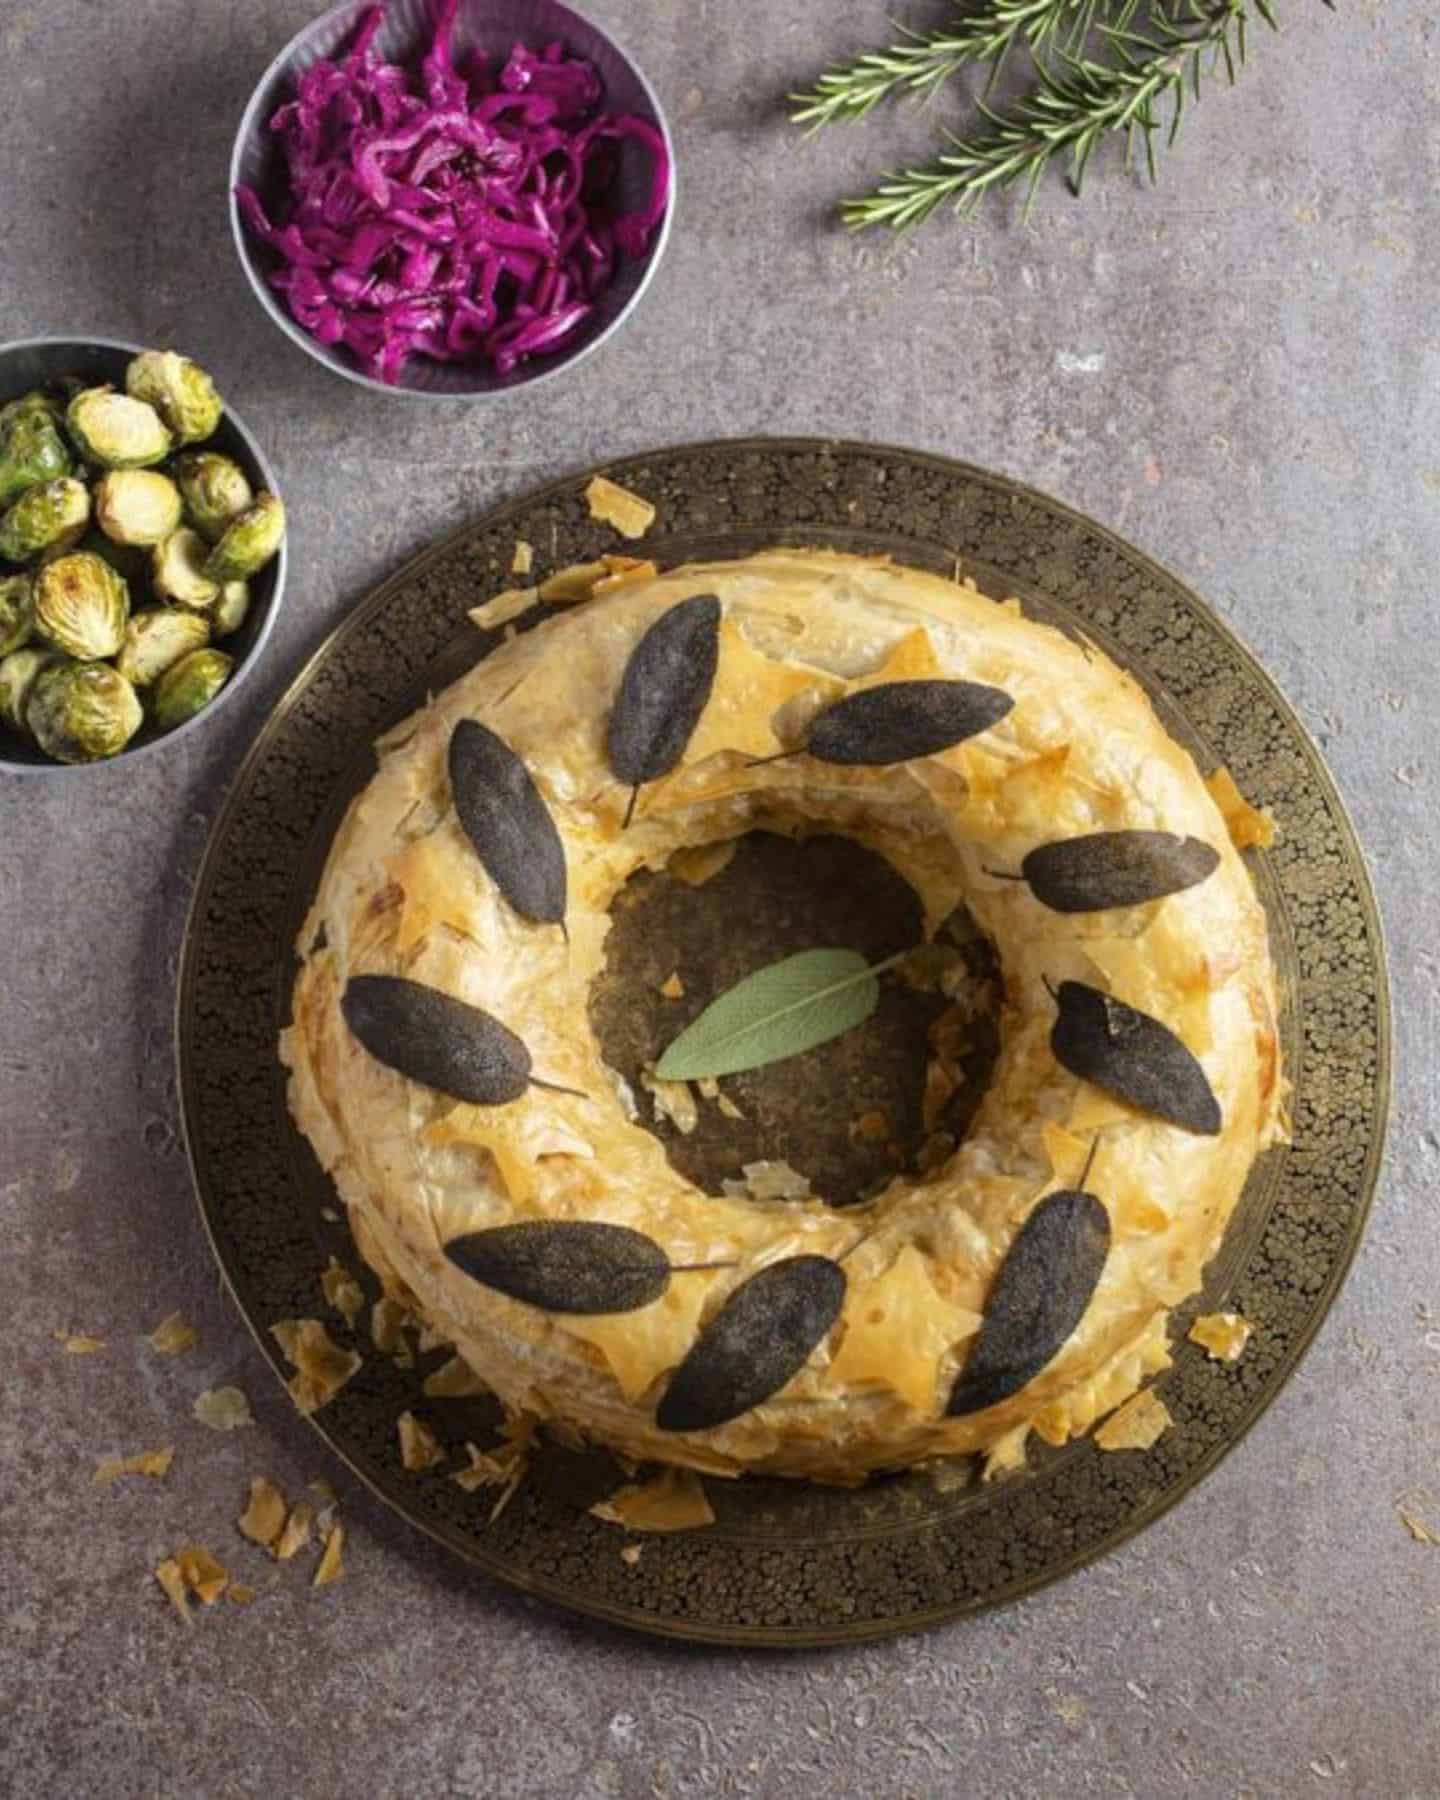 A pastry wreath with vegan roast dinner dishes in the background, showing sprouts and cabbage